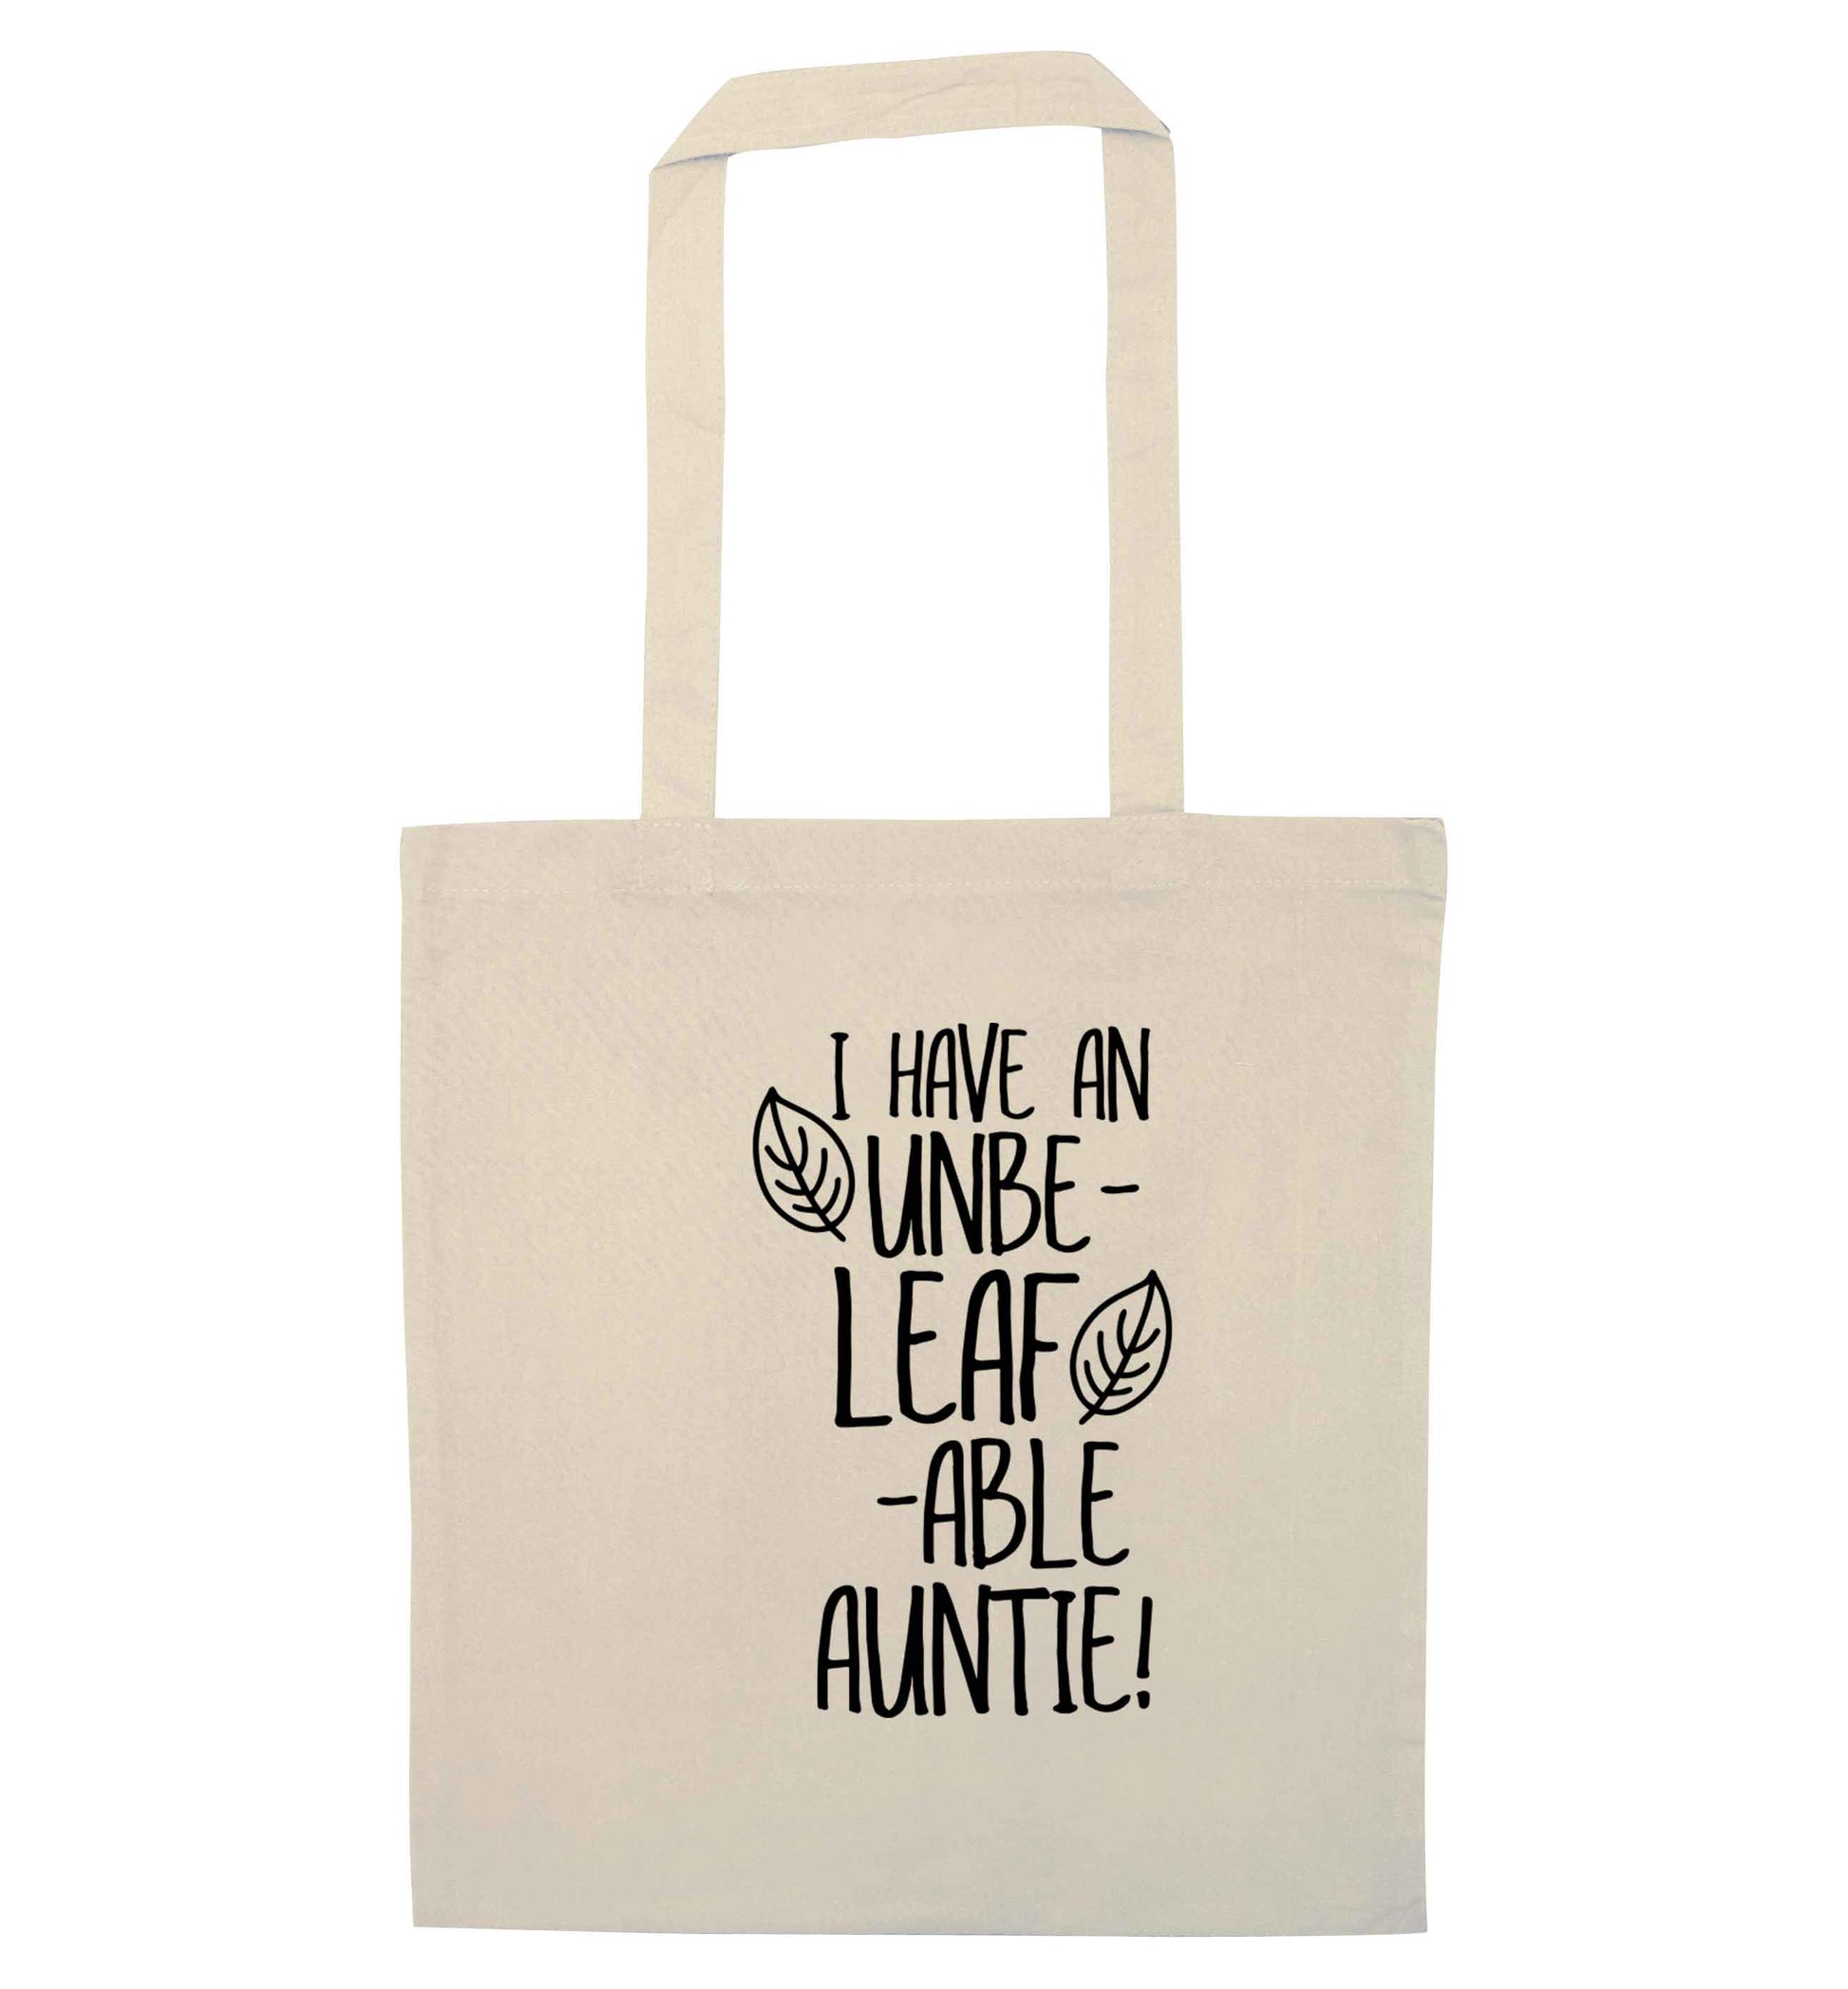 I have an unbe-leaf-able auntie natural tote bag